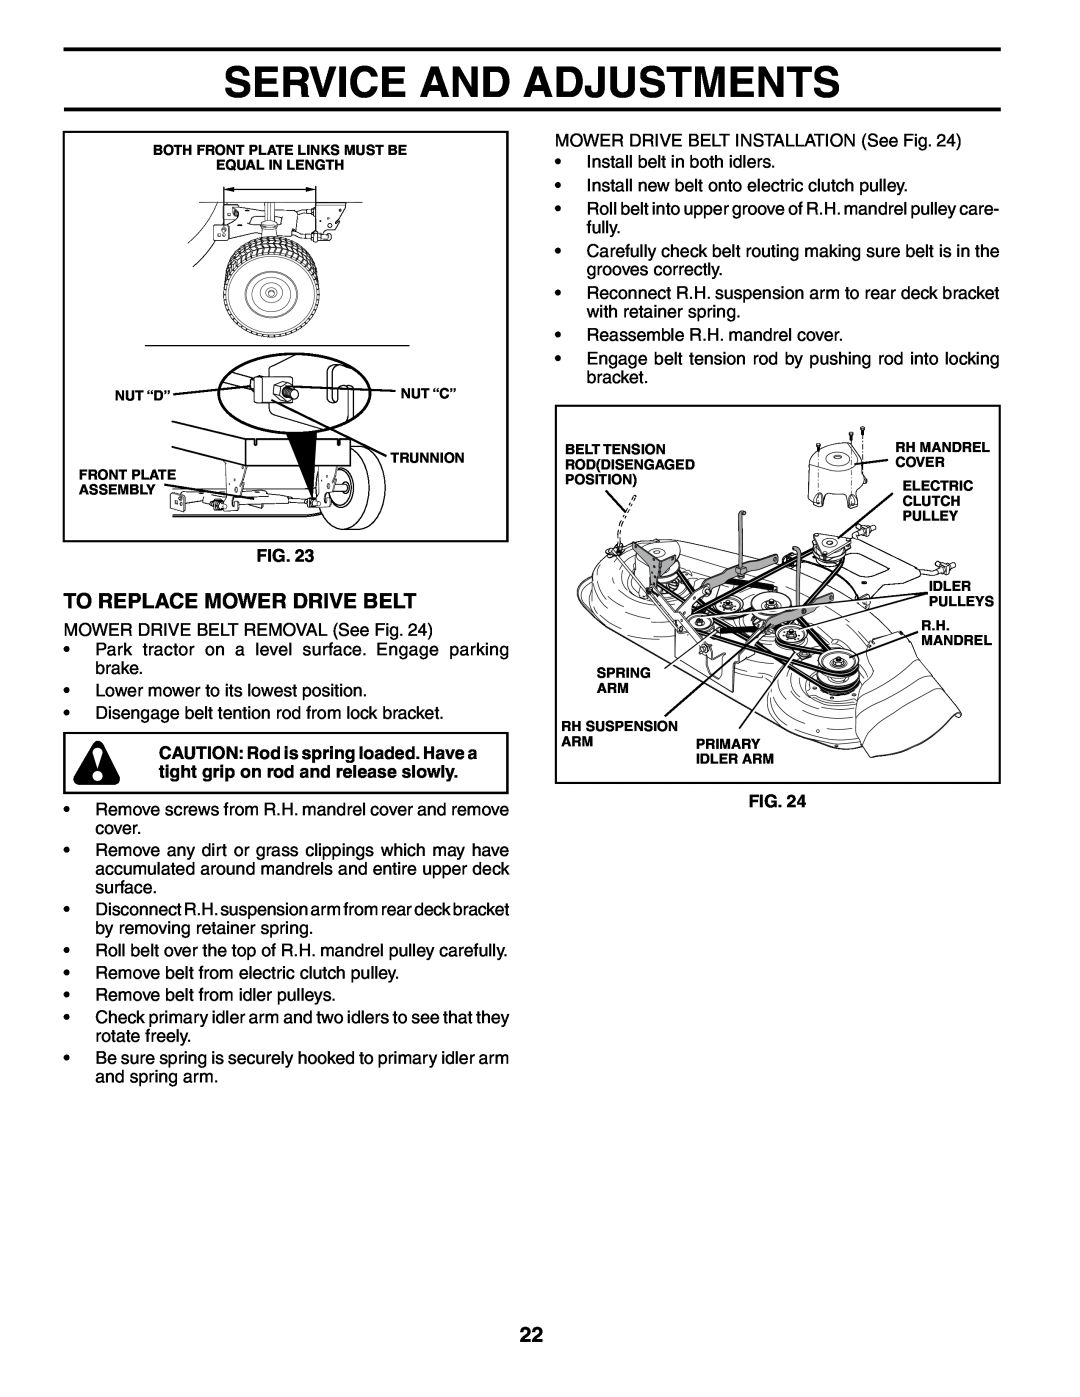 Poulan PDGT26H48B owner manual To Replace Mower Drive Belt, Service And Adjustments, Nut “C” 